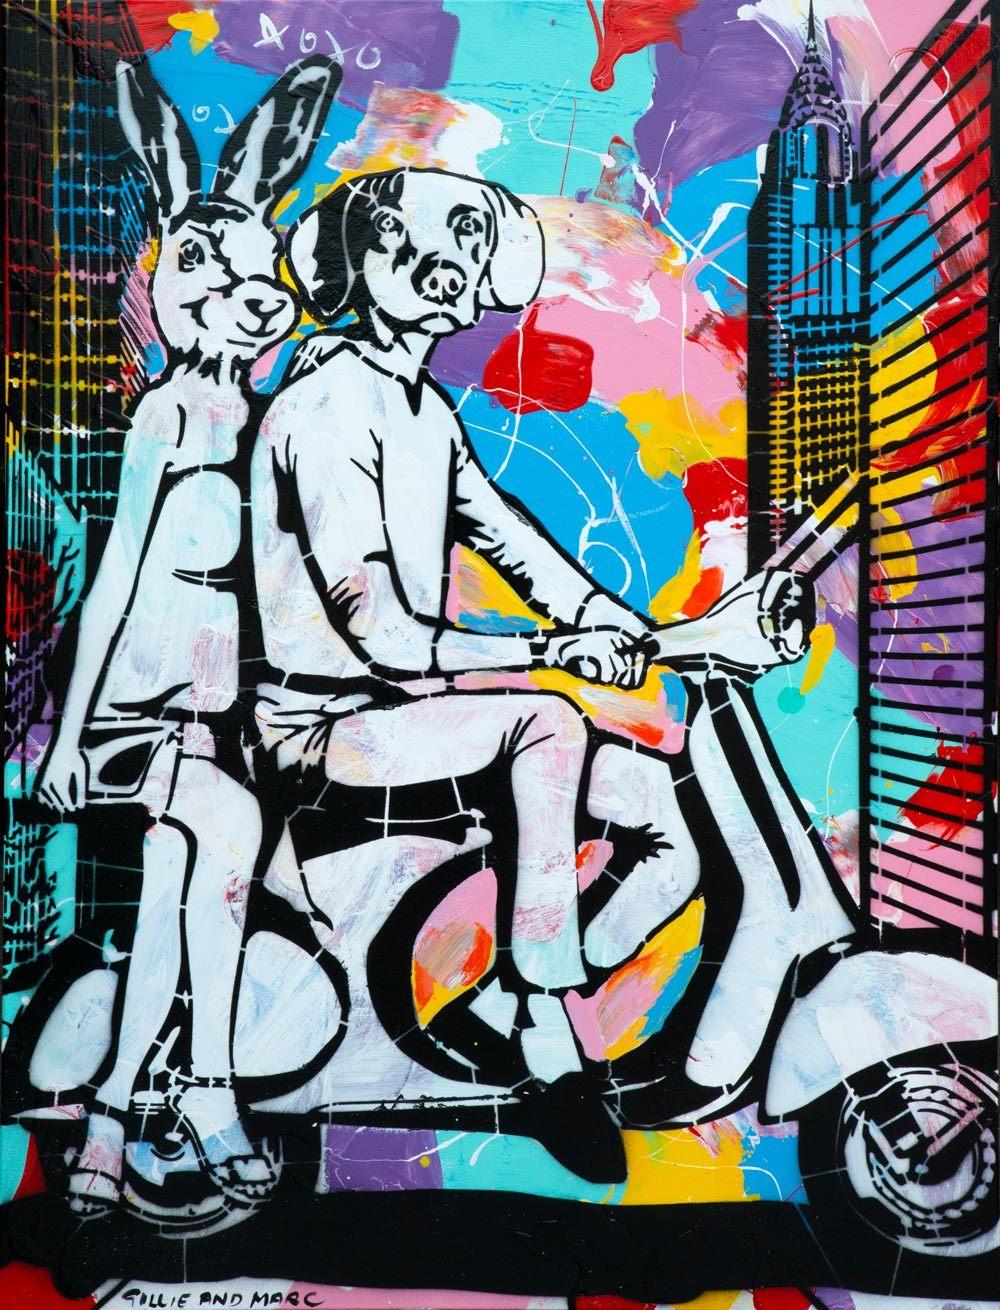 Painting Print - Gillie and Marc - Art - Limited Edition - Vespa - New York 